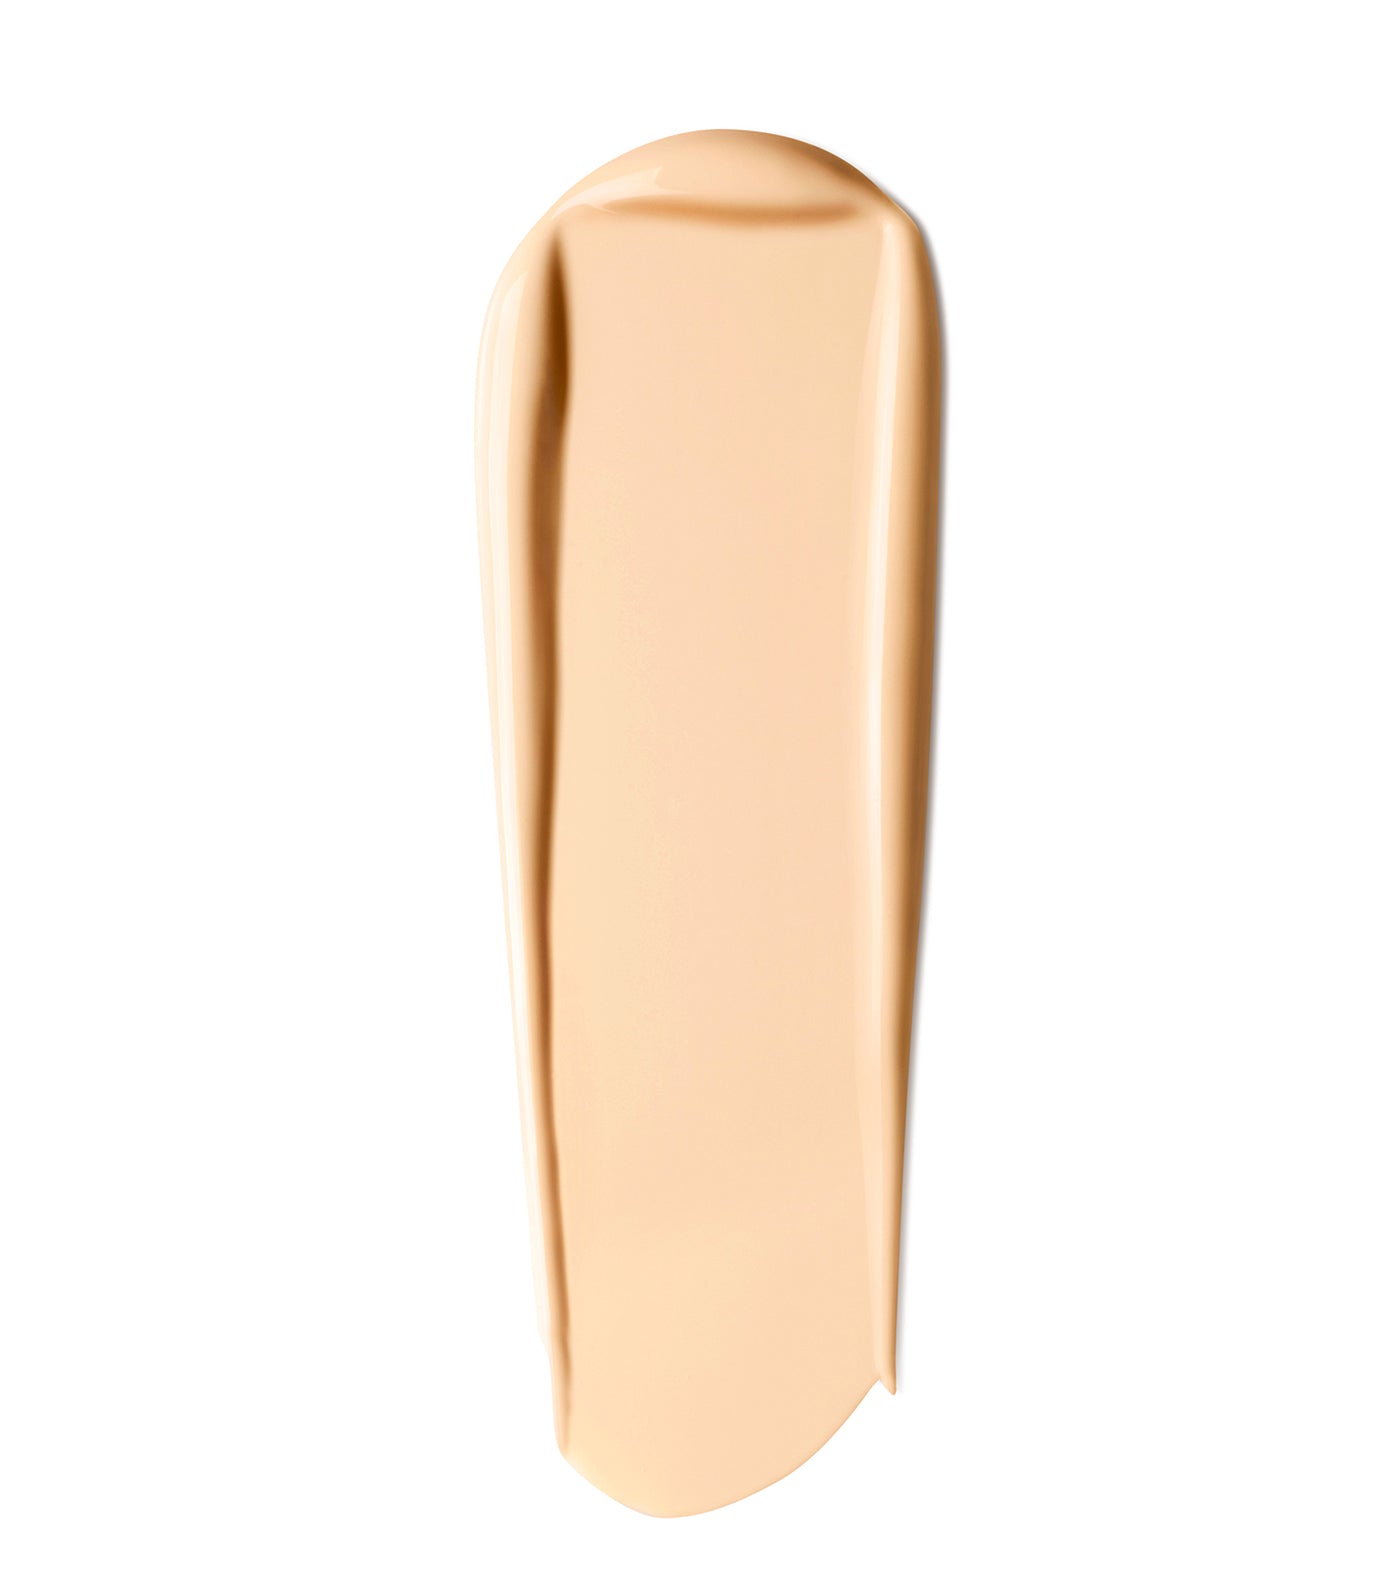 Parure Gold Skin Matte: No-transfer High Perfection Foundation - 24H Care & Wear